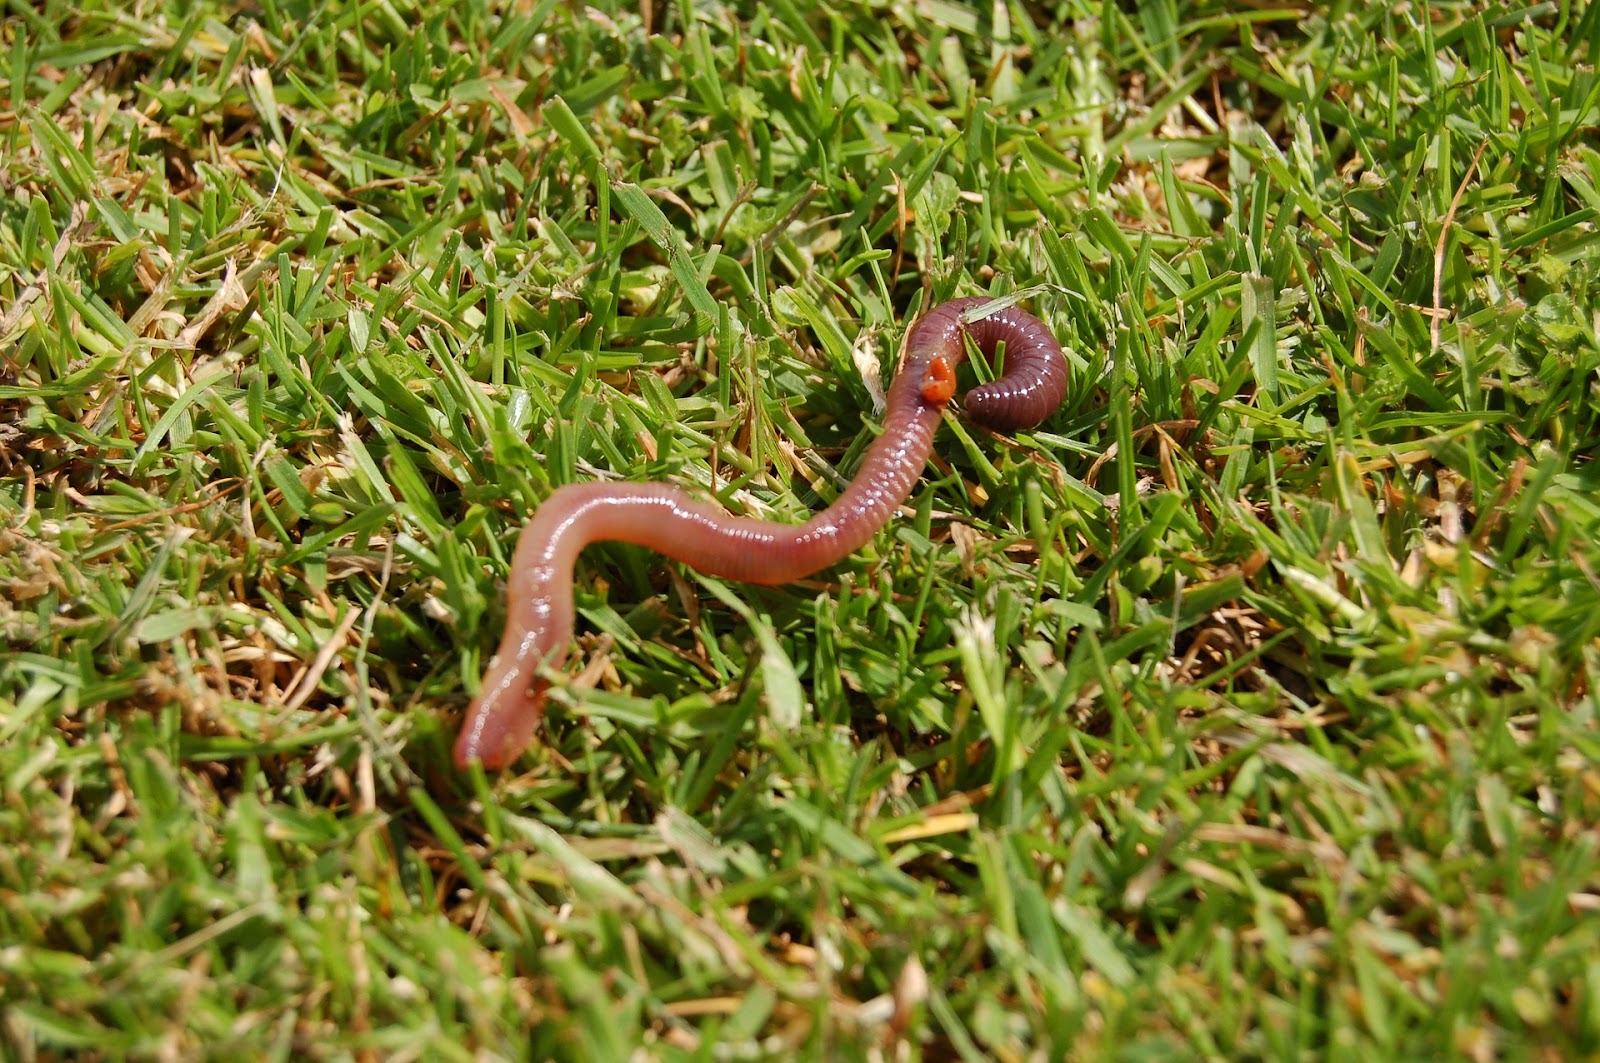 Earthworm in the grass